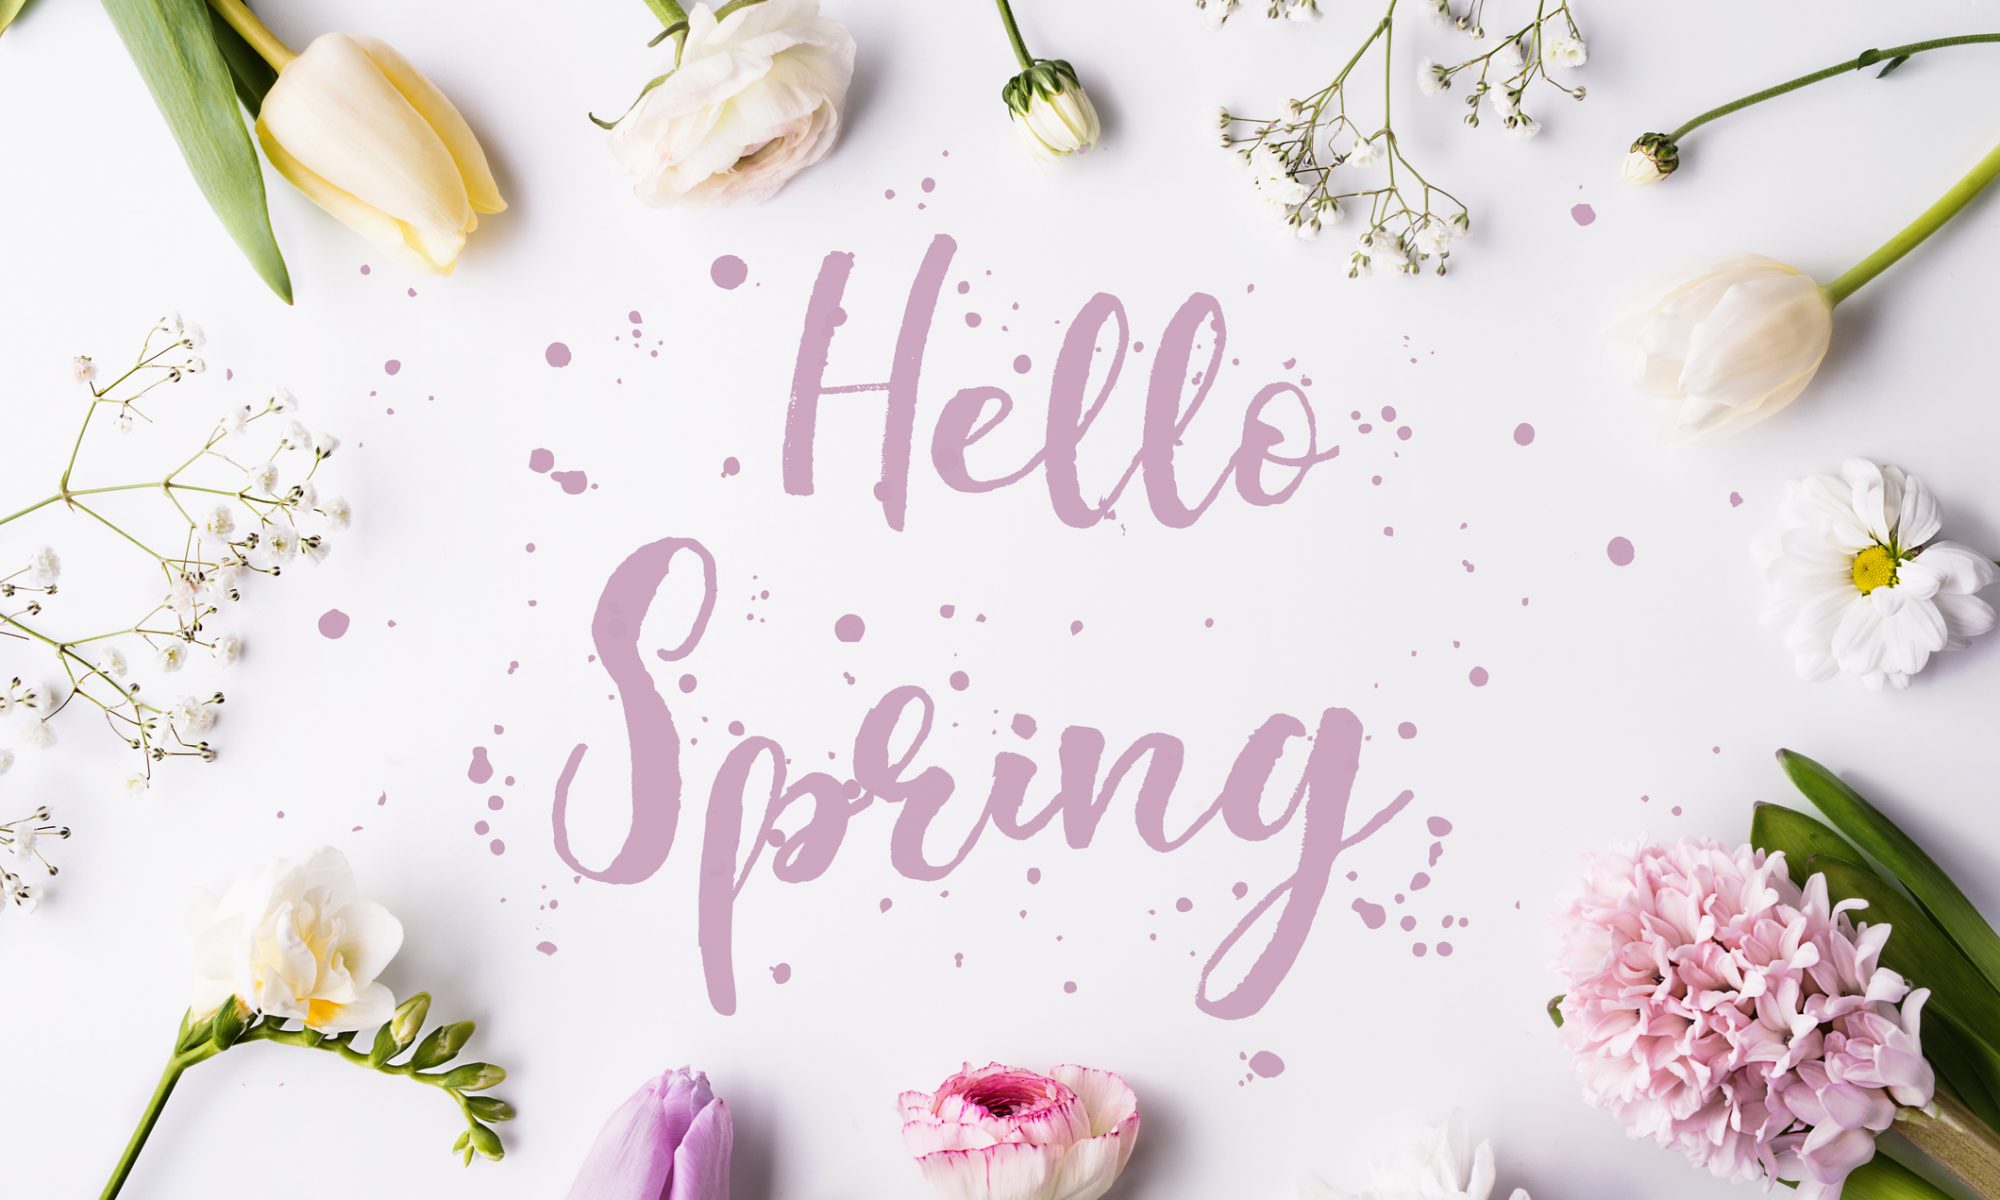 Hello spring phrase and flowers on a white background. Studio shot. Flat lay.